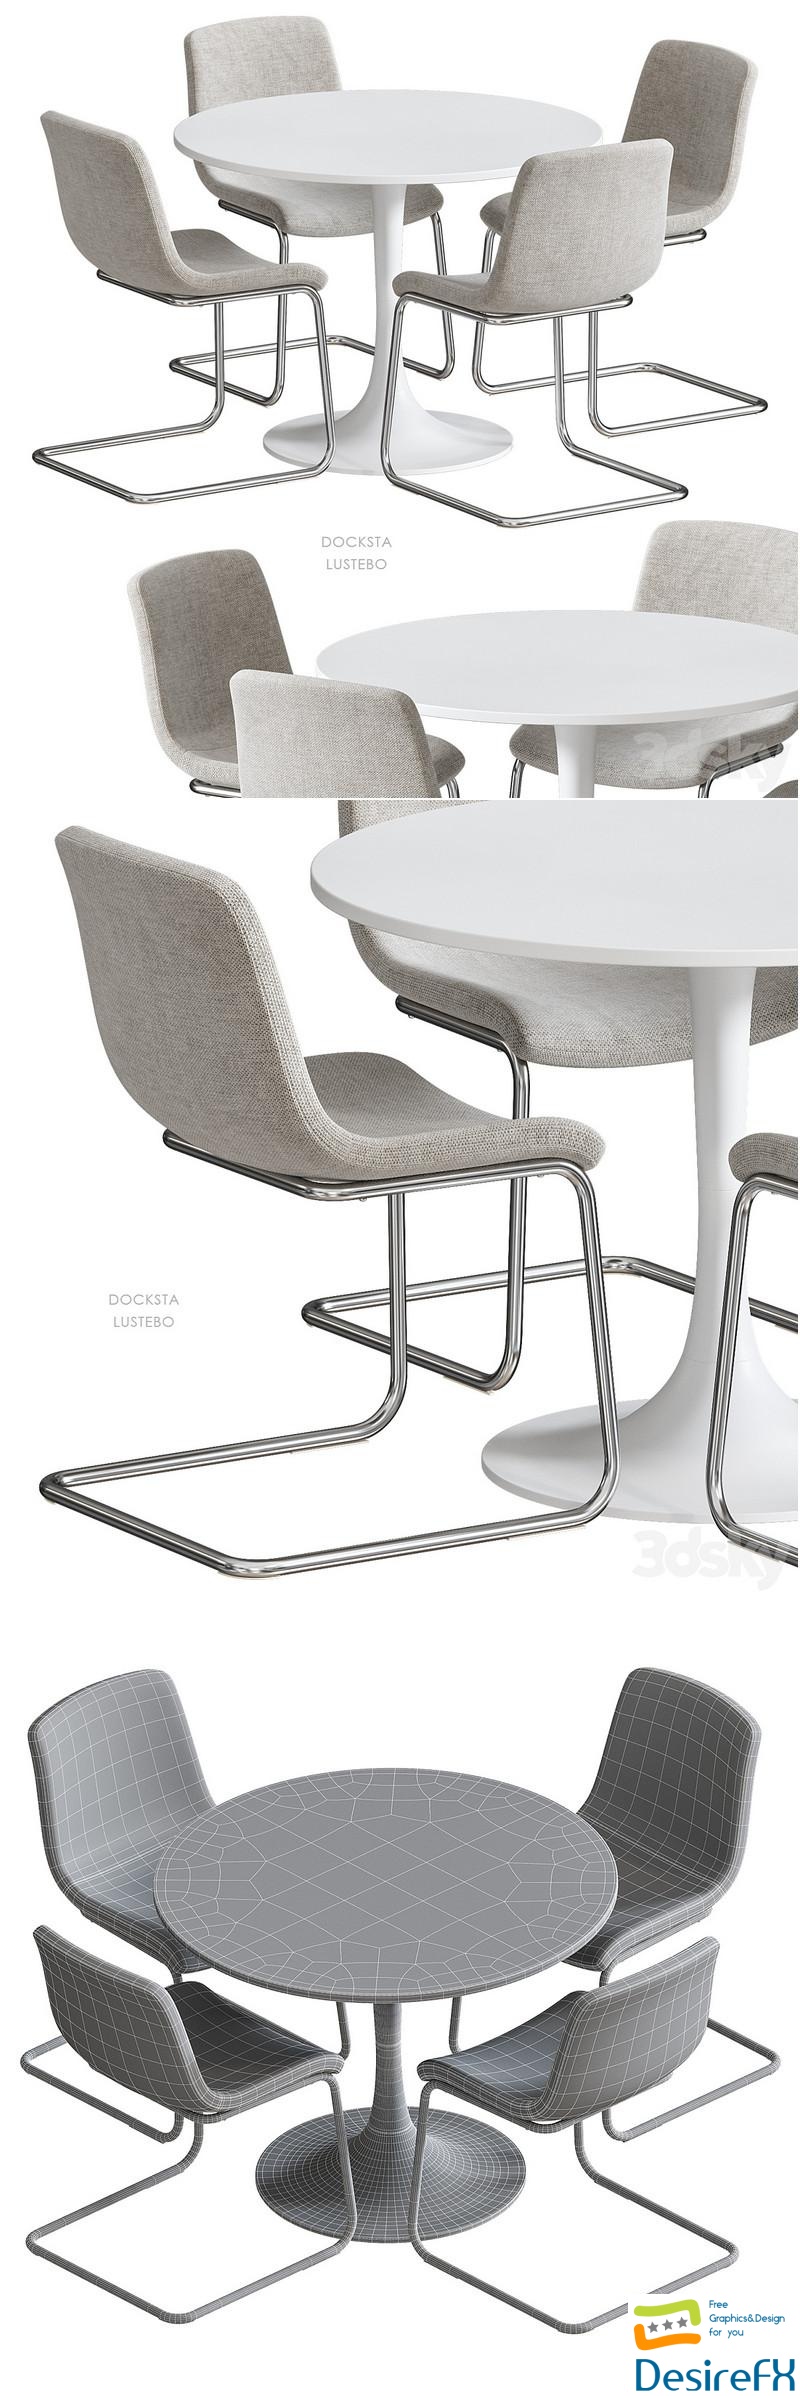 DOCKSTA LUSTEBO IKEA table and chairs 3D Model